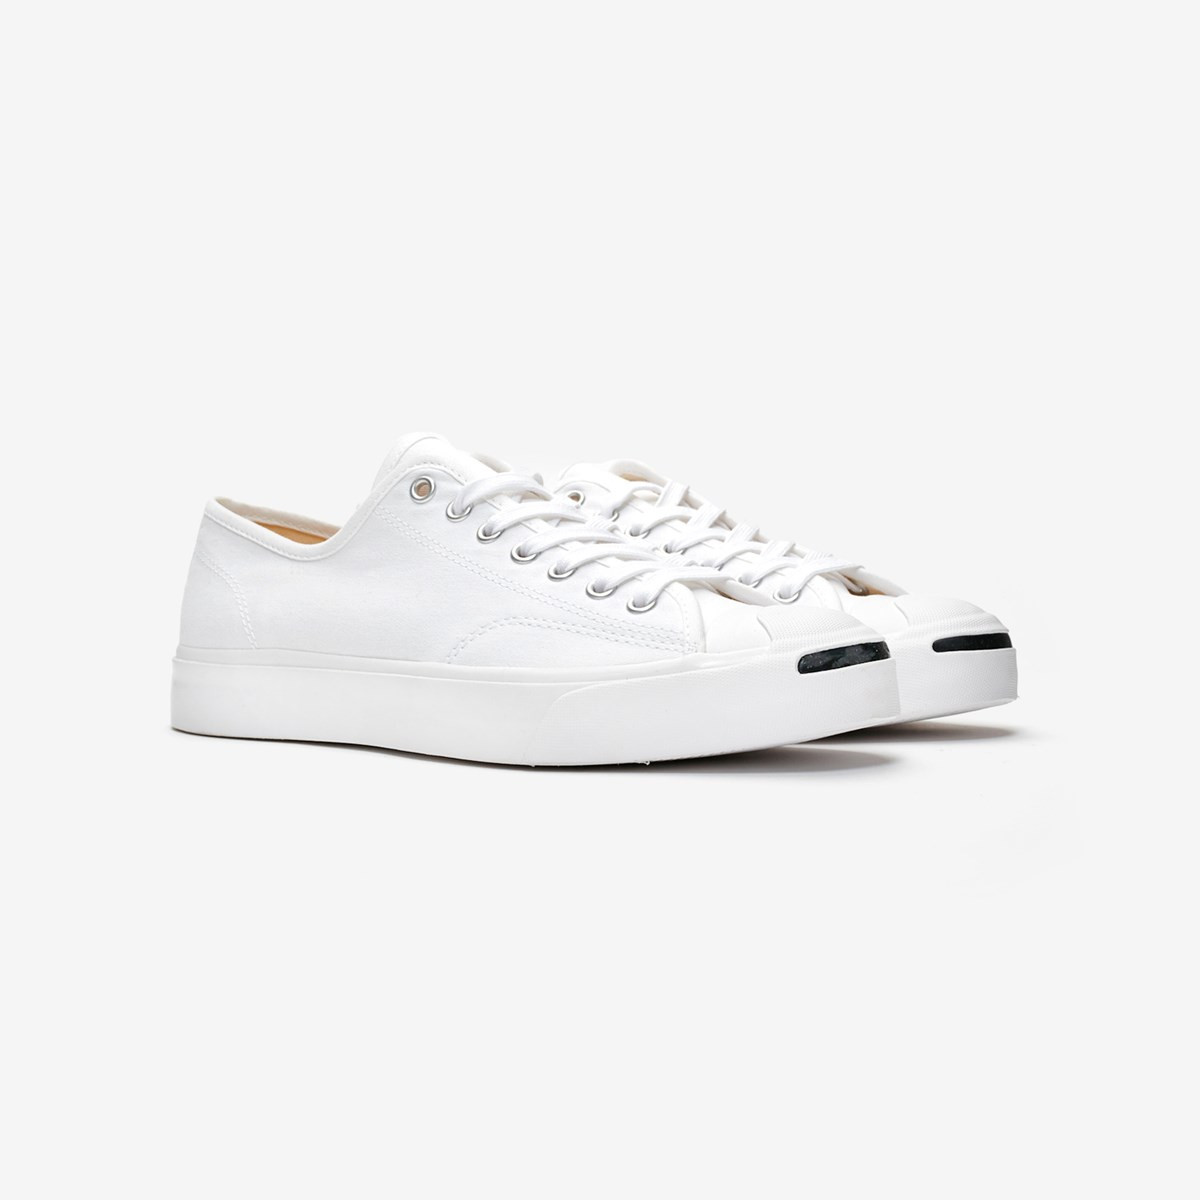 JACK PURCELL GOLD STANDARD 